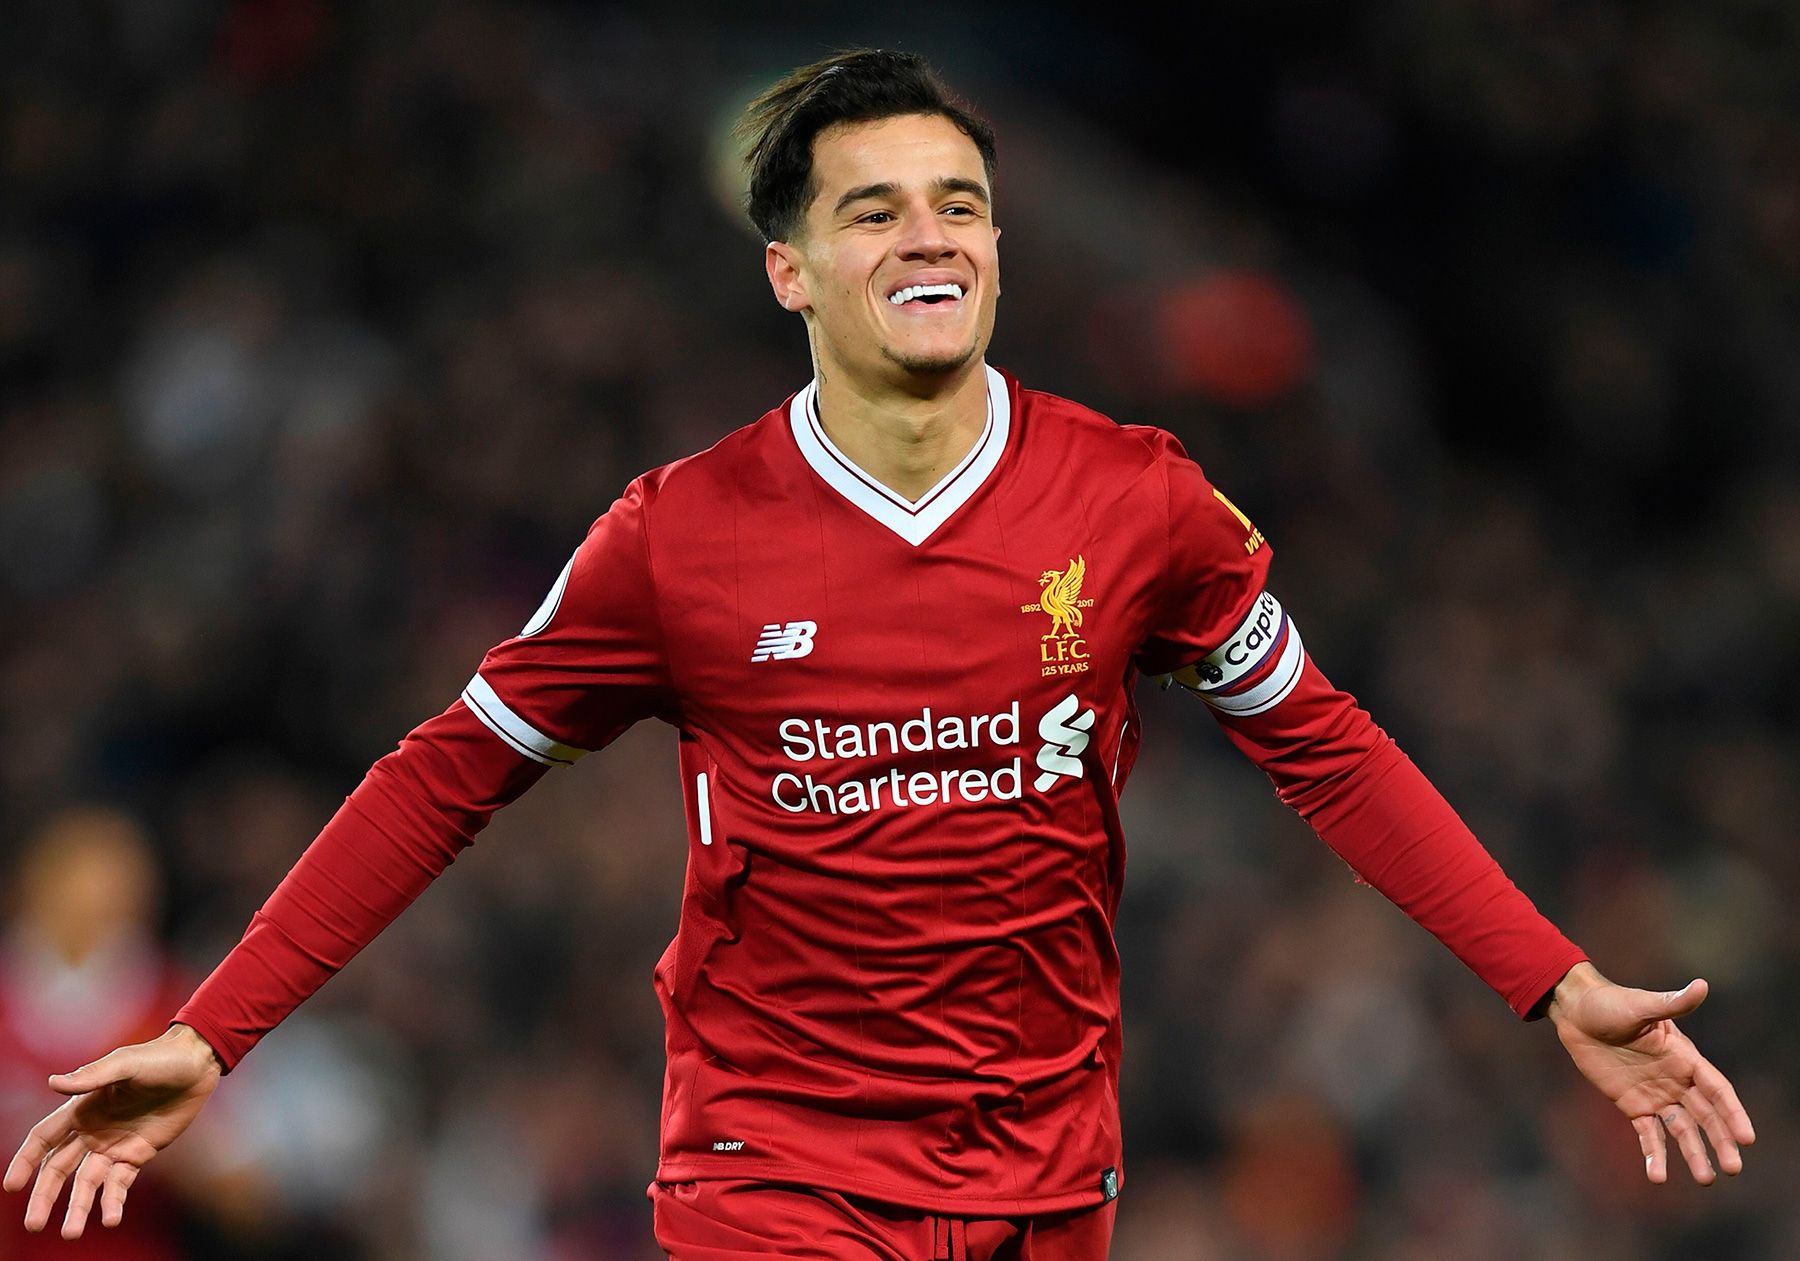 Coutinho celebrates a goal with Liverpool